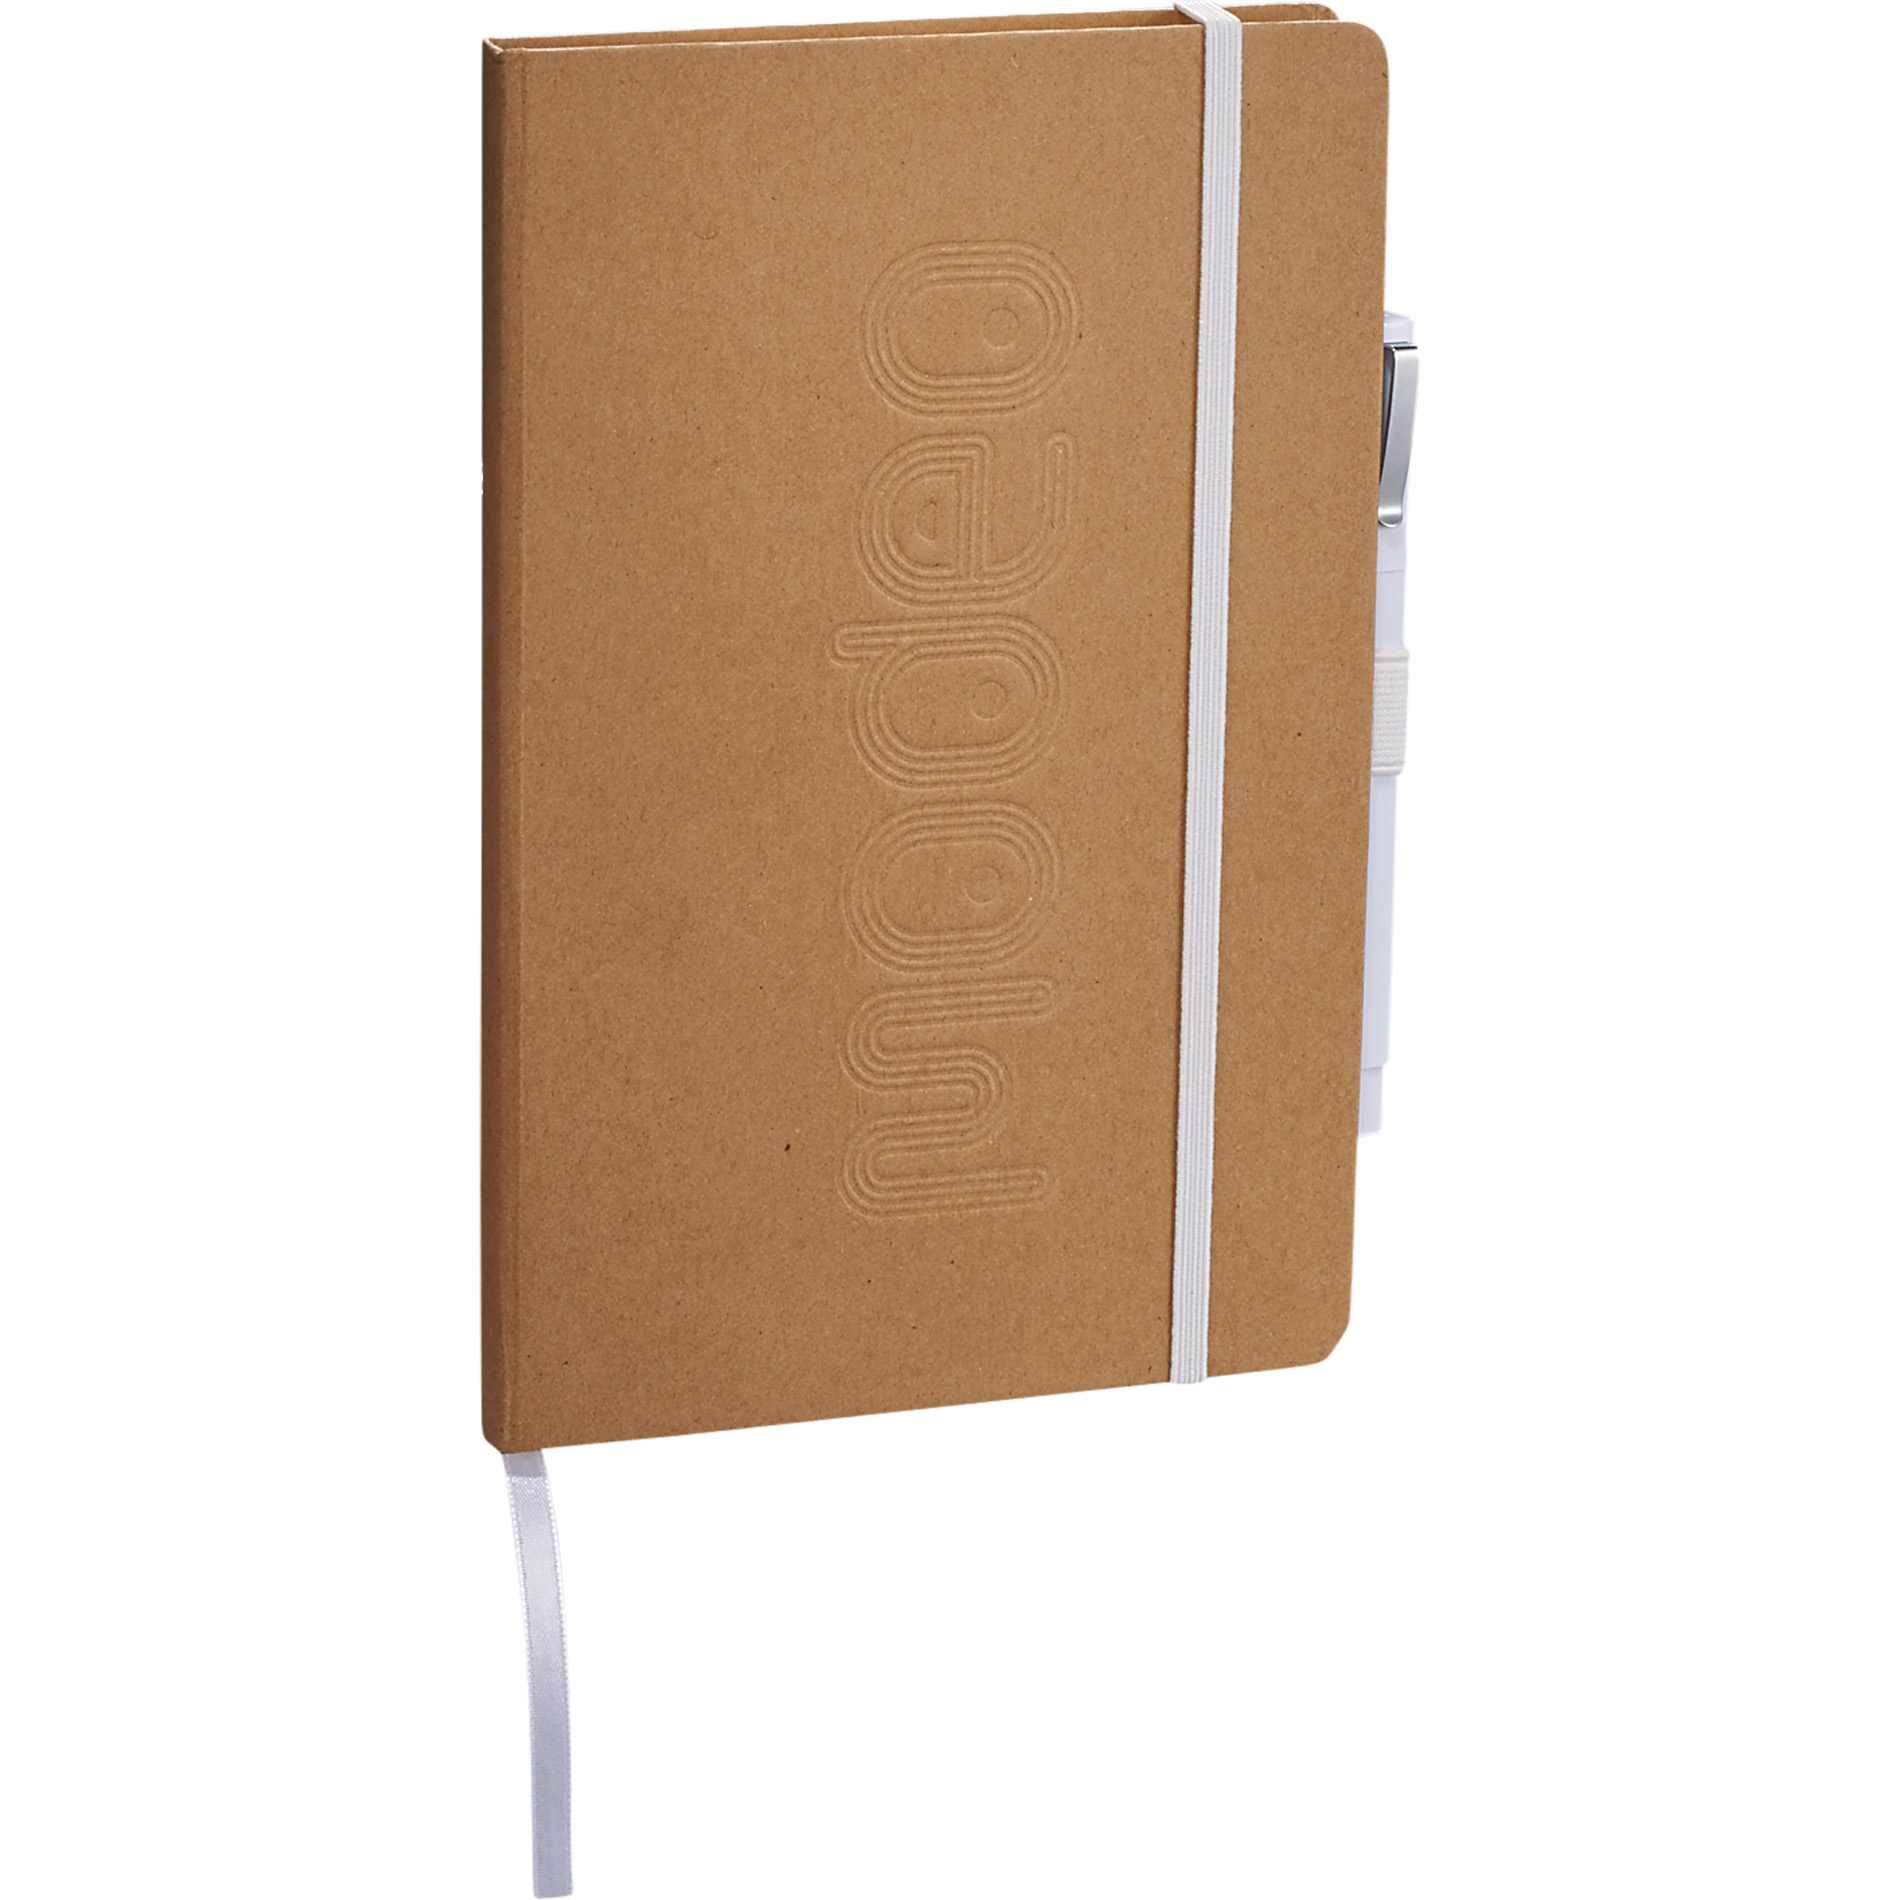 Eco friendly journal set with white accents